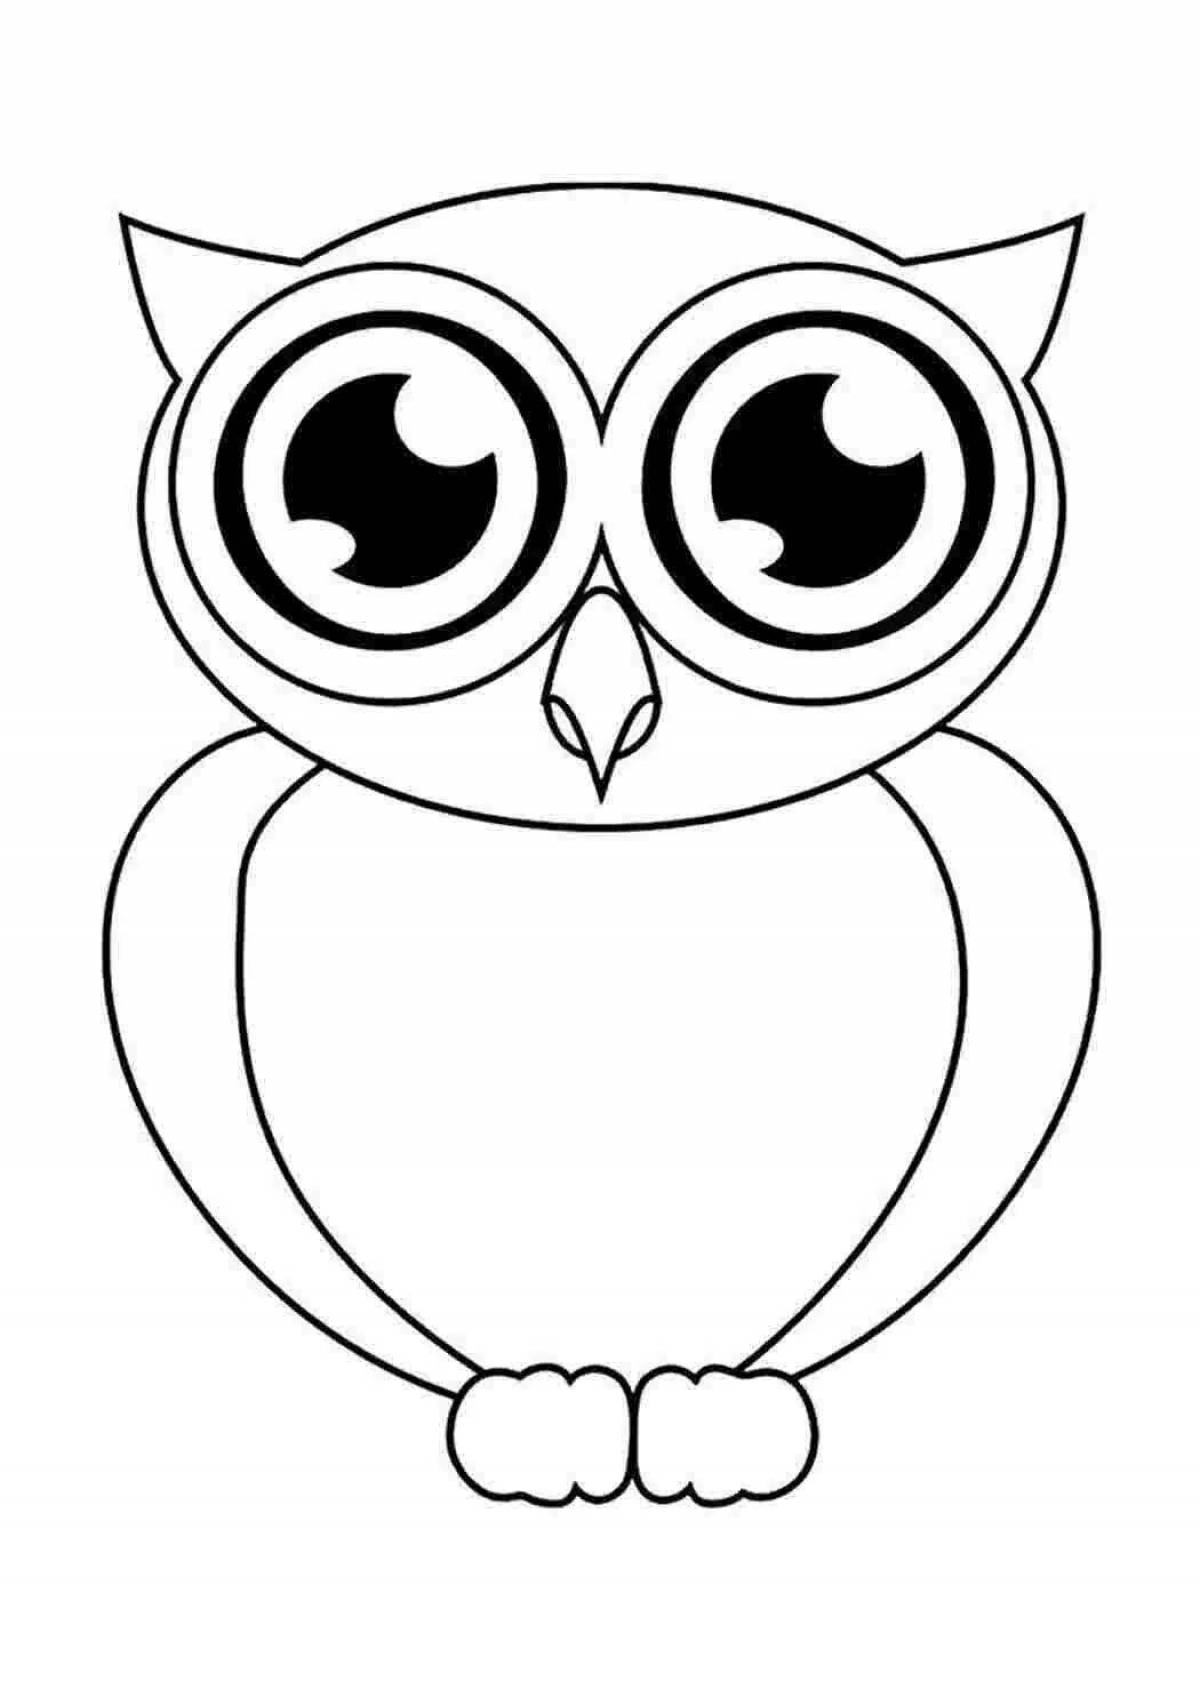 Charming coloring drawing of an owl